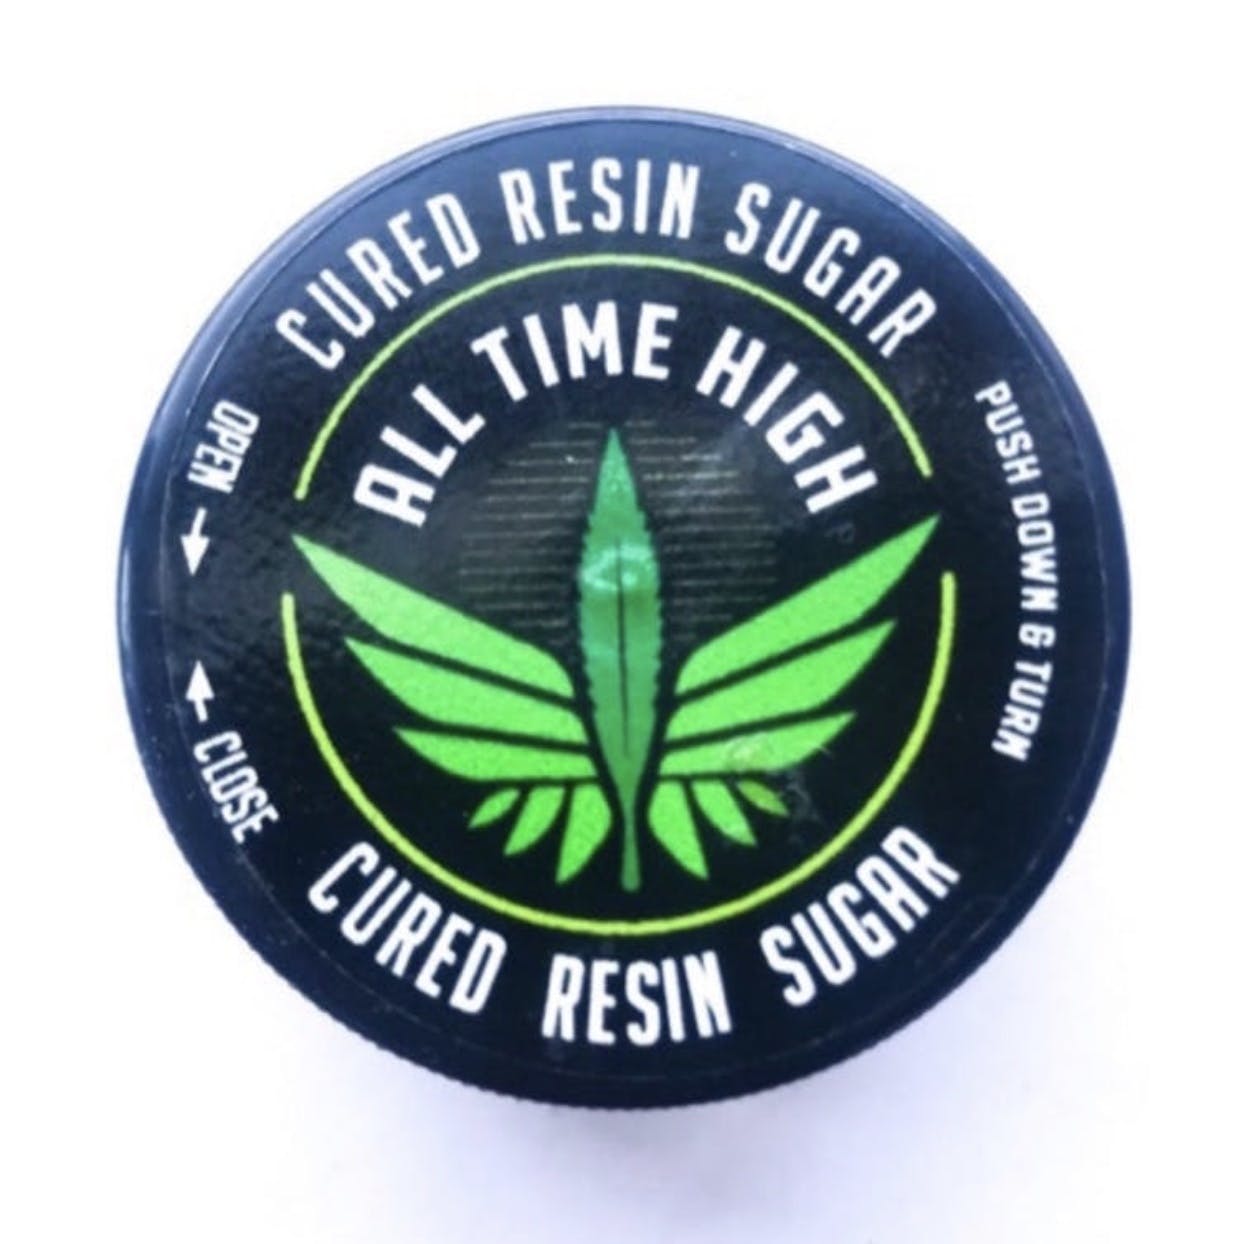 marijuana-dispensaries-melrose-place-25-cap-in-los-angeles-all-time-high-cured-resin-sugar-5-for-160